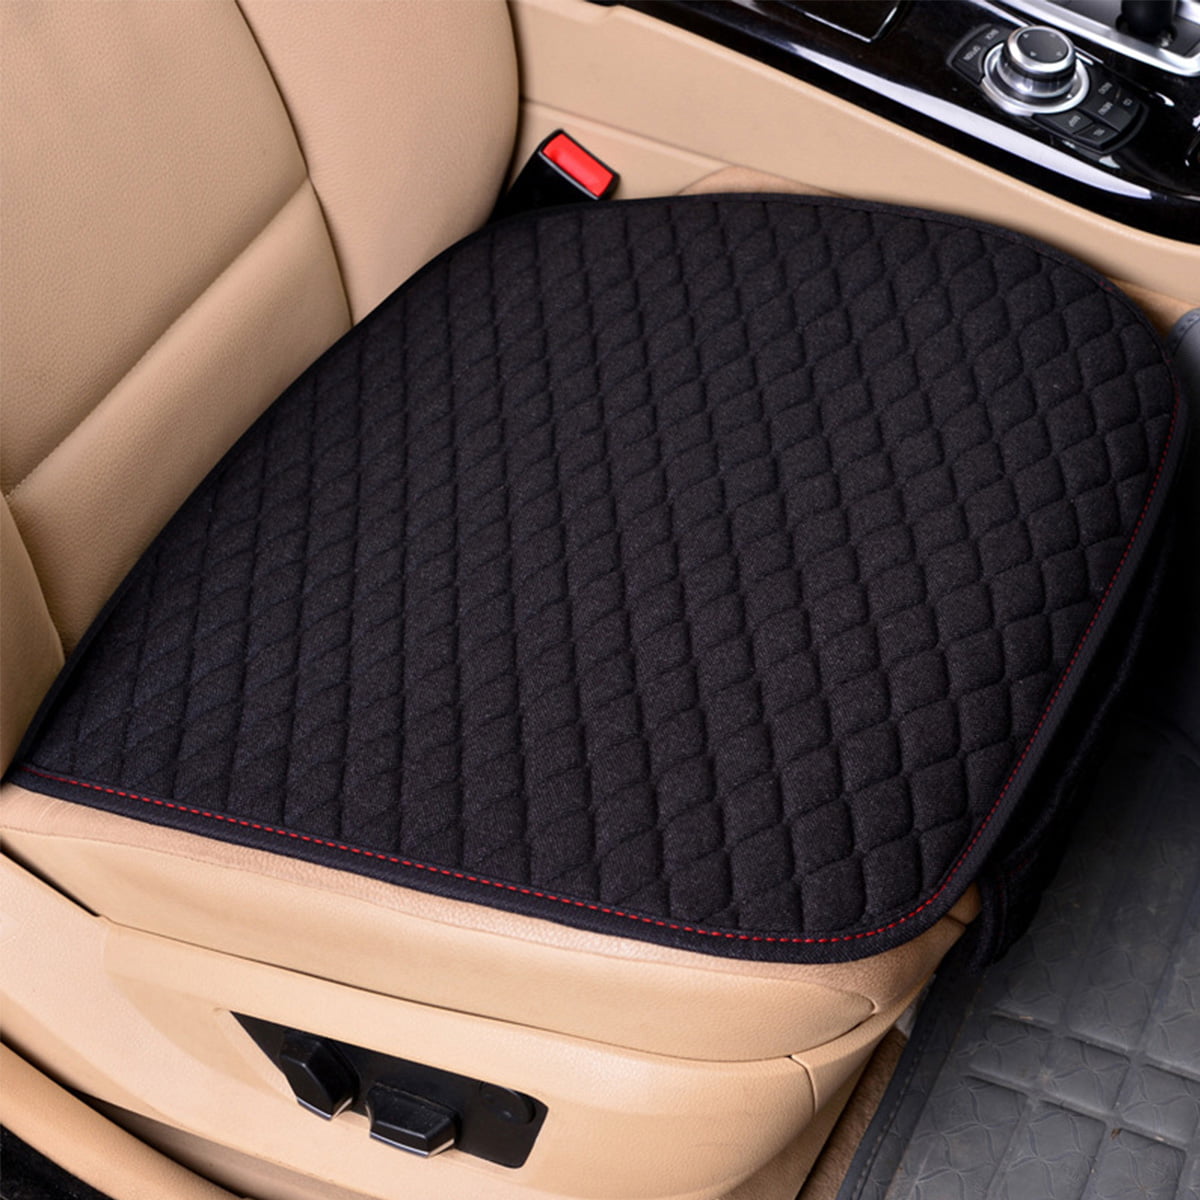 Beige Office,Home,Kids,Pet Dog Car Rear Seat Cushion Cover Pad Auto Non-Slip Plush Long Rear Seat Chair Cover Protective Cushion Mat Universal for Car 